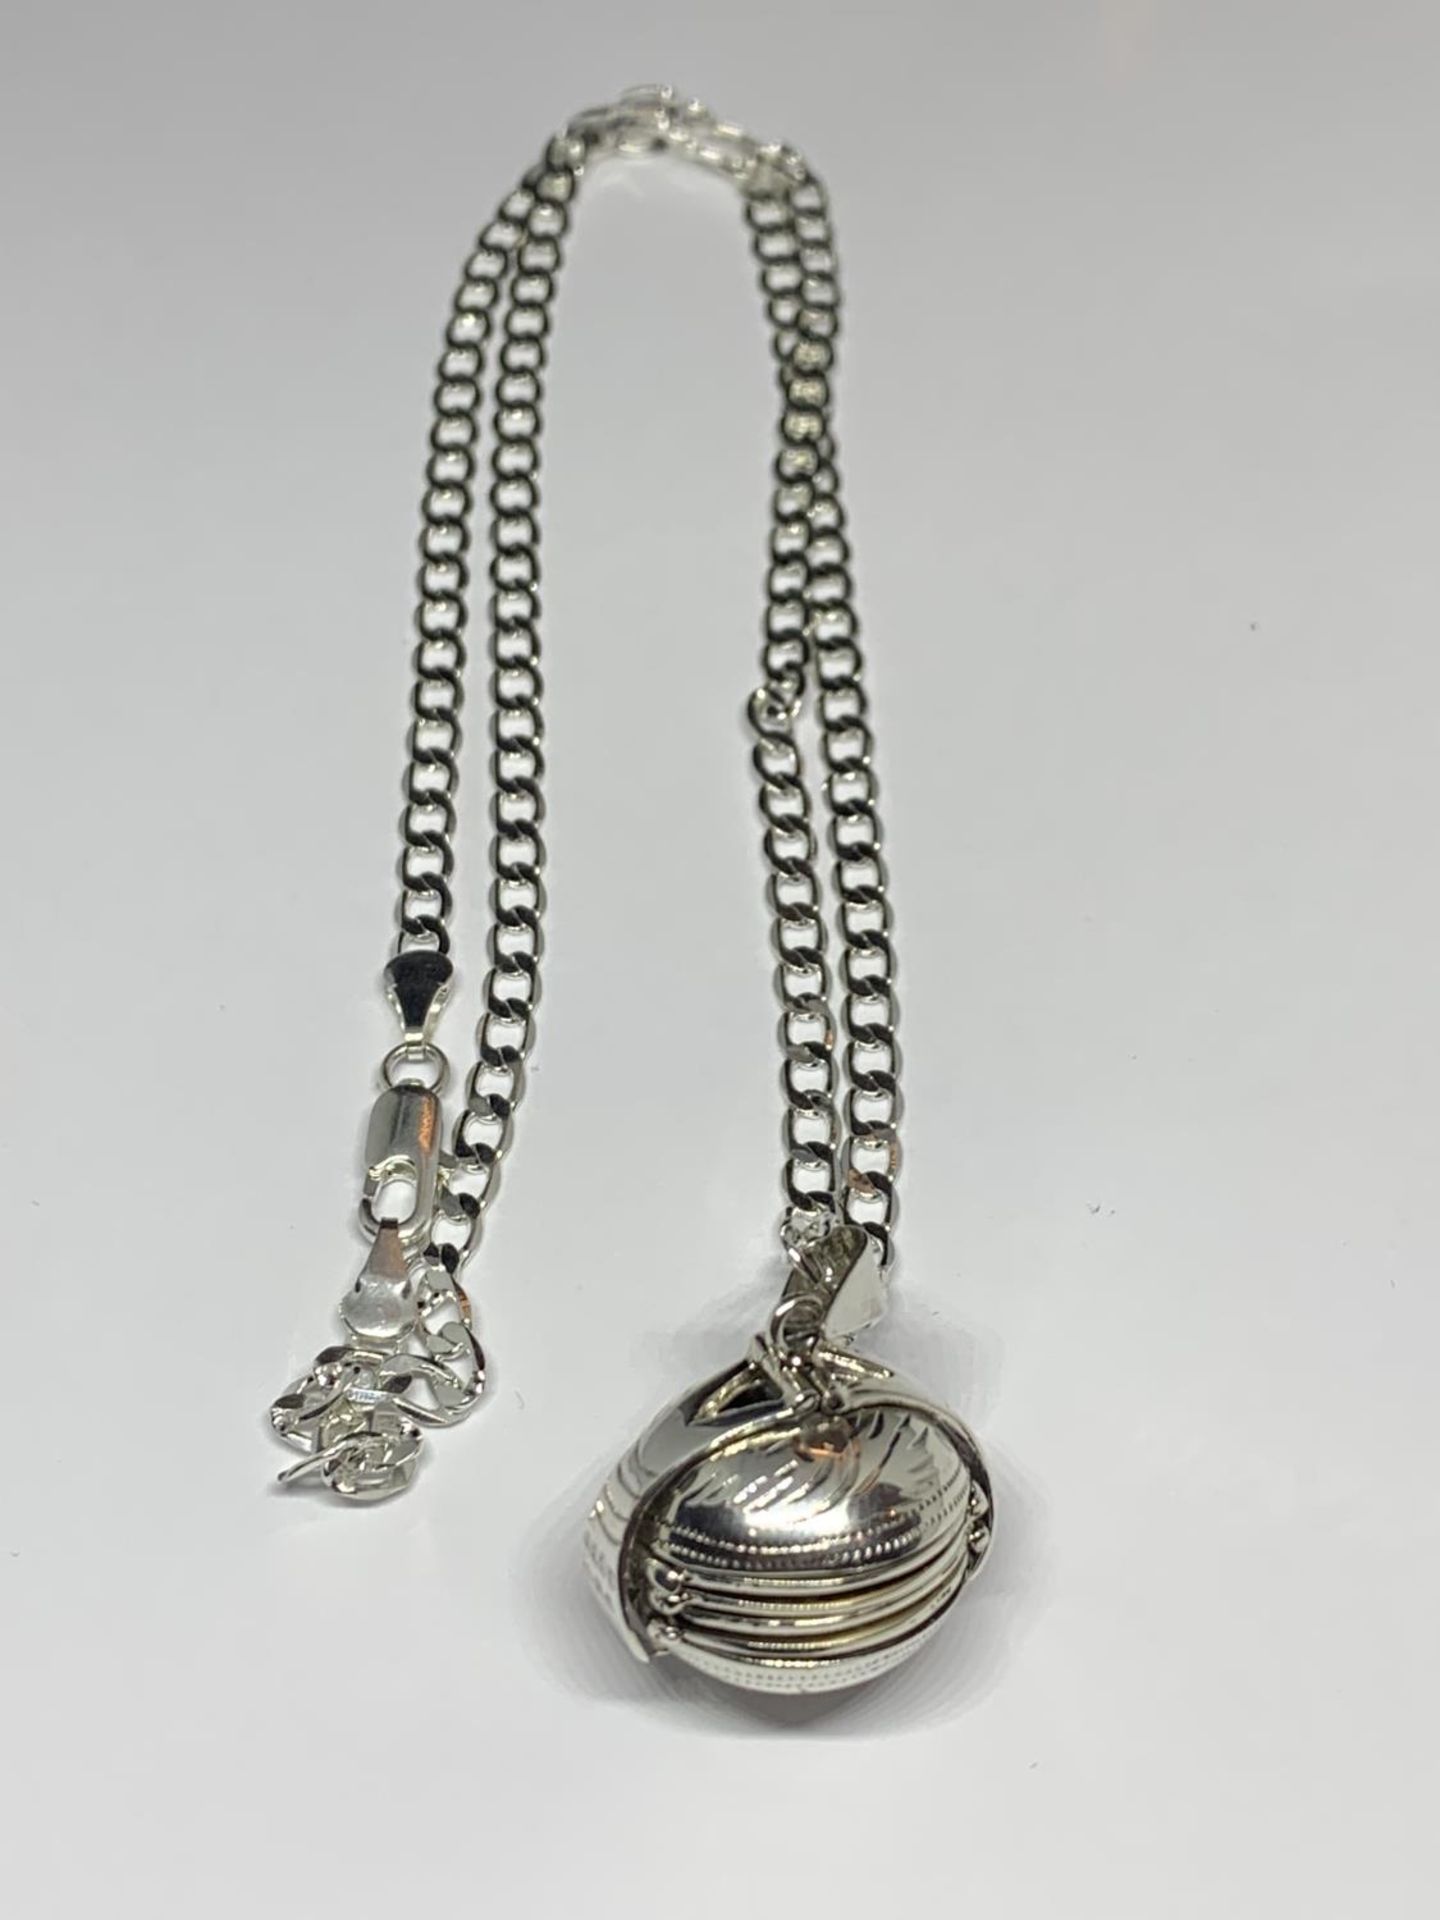 A MARKD SILVER NECKLACE WITH AN ORNATE BALL LOCKET PENDANT